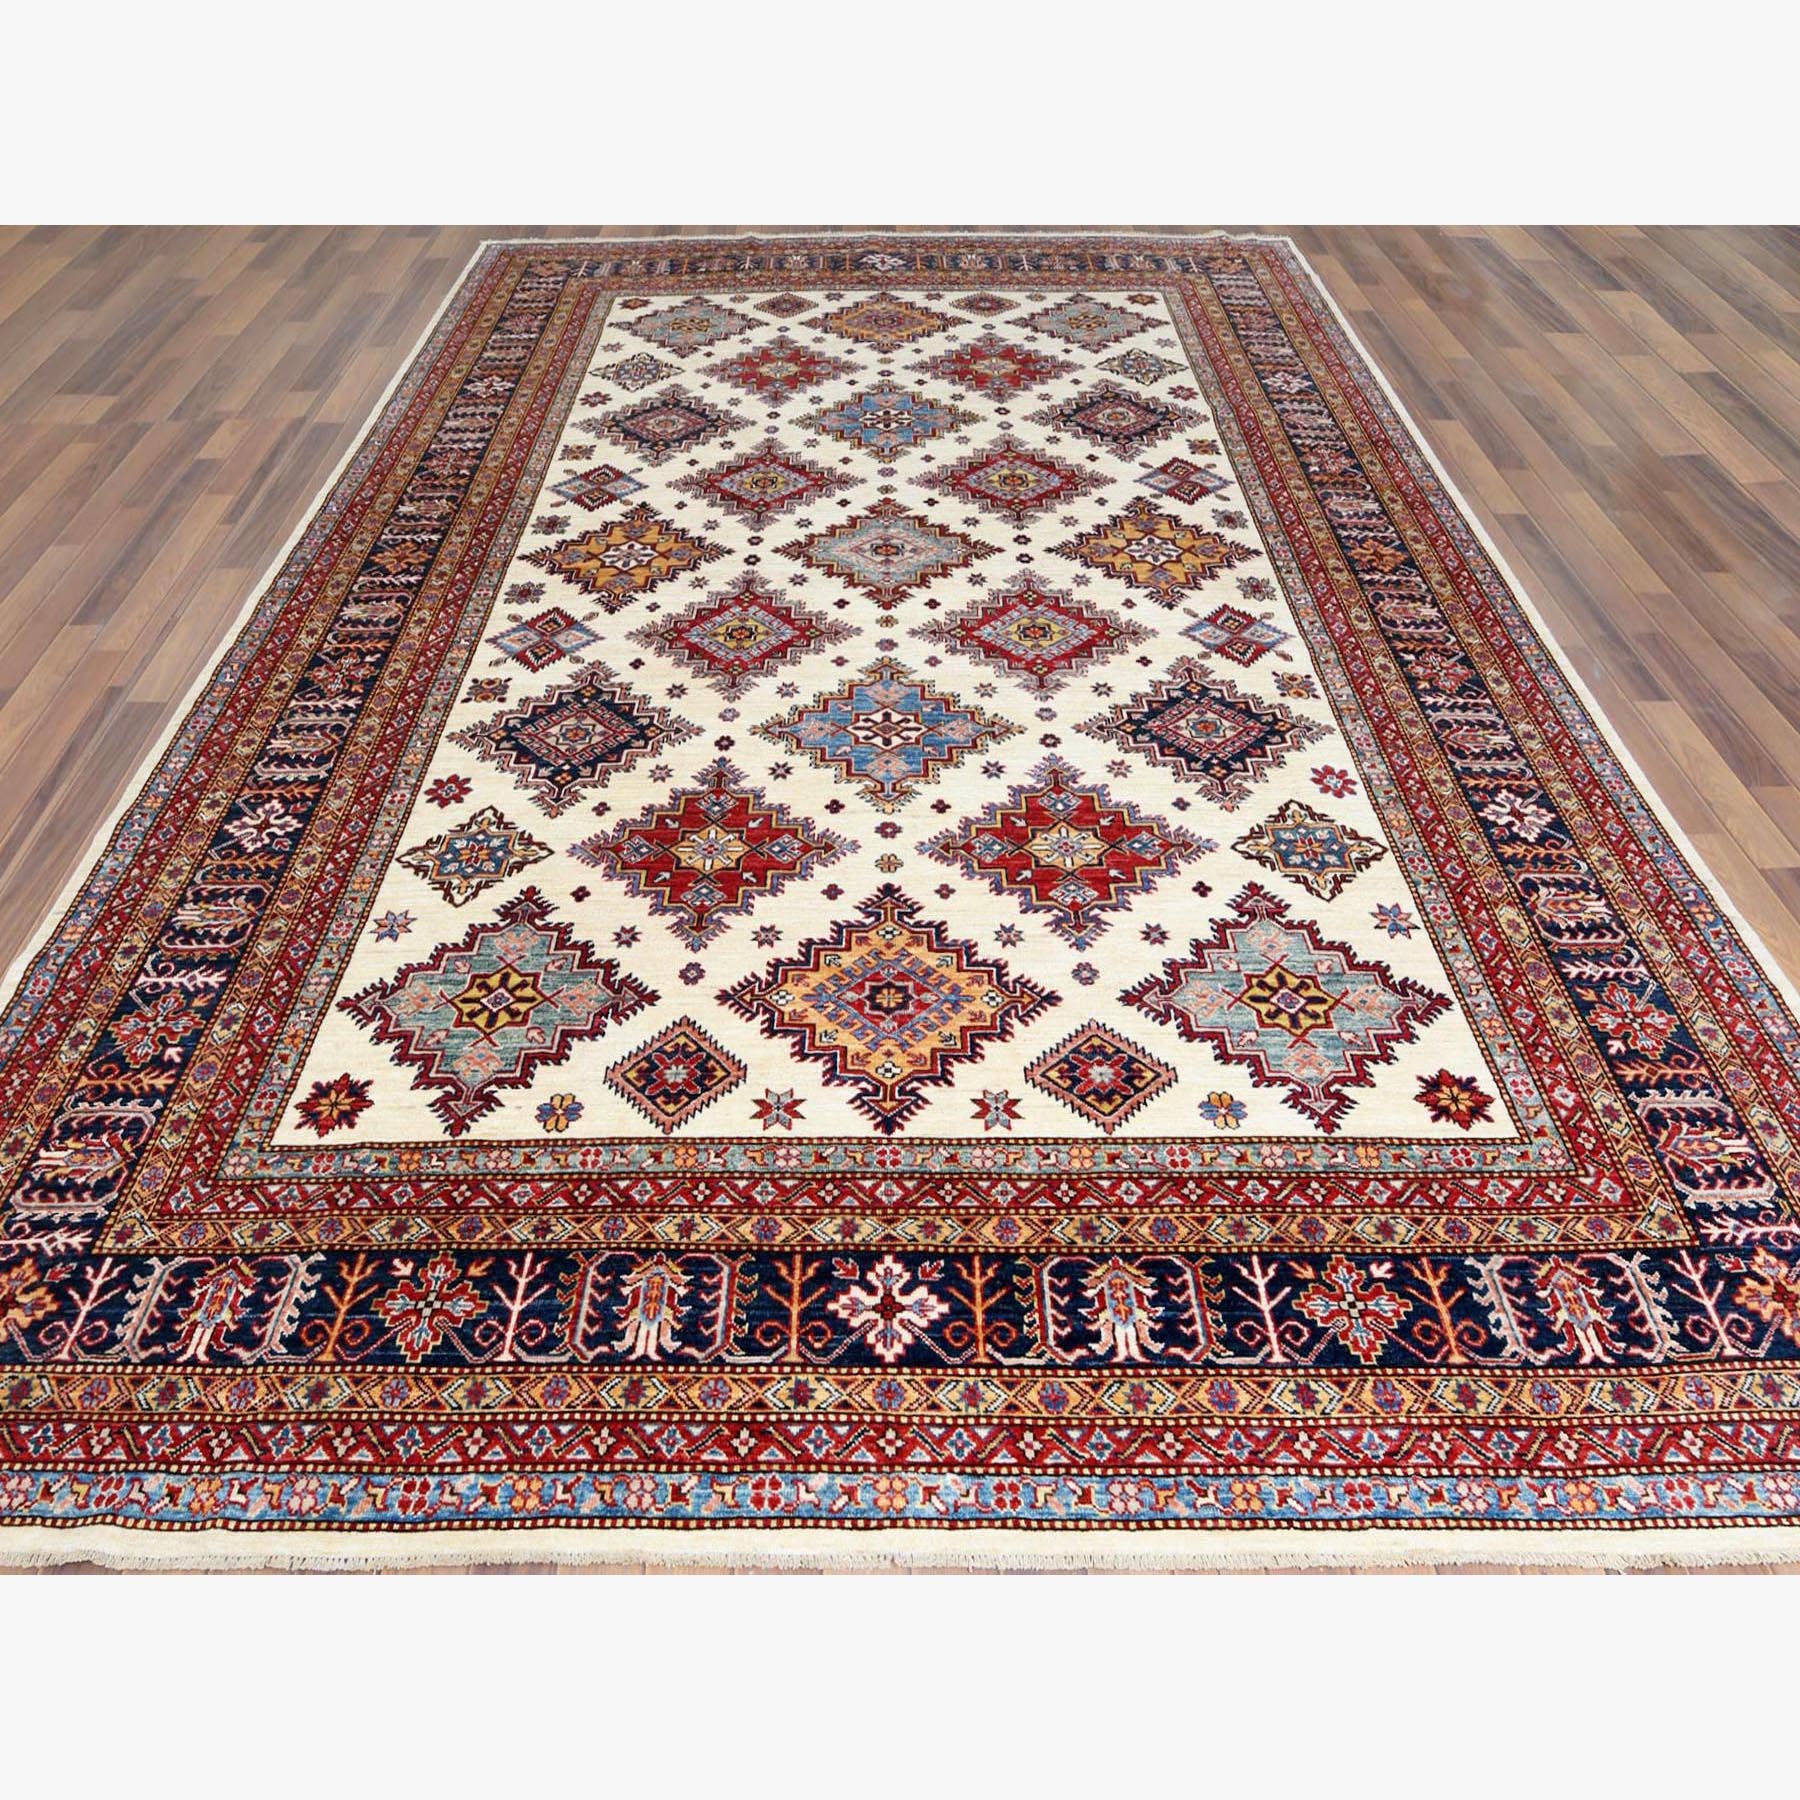 9'2"x12'1" Ivory with Pop of Color Hand Woven Natural Wool Super Kazak with Geometric Medallions Oriental Rug 